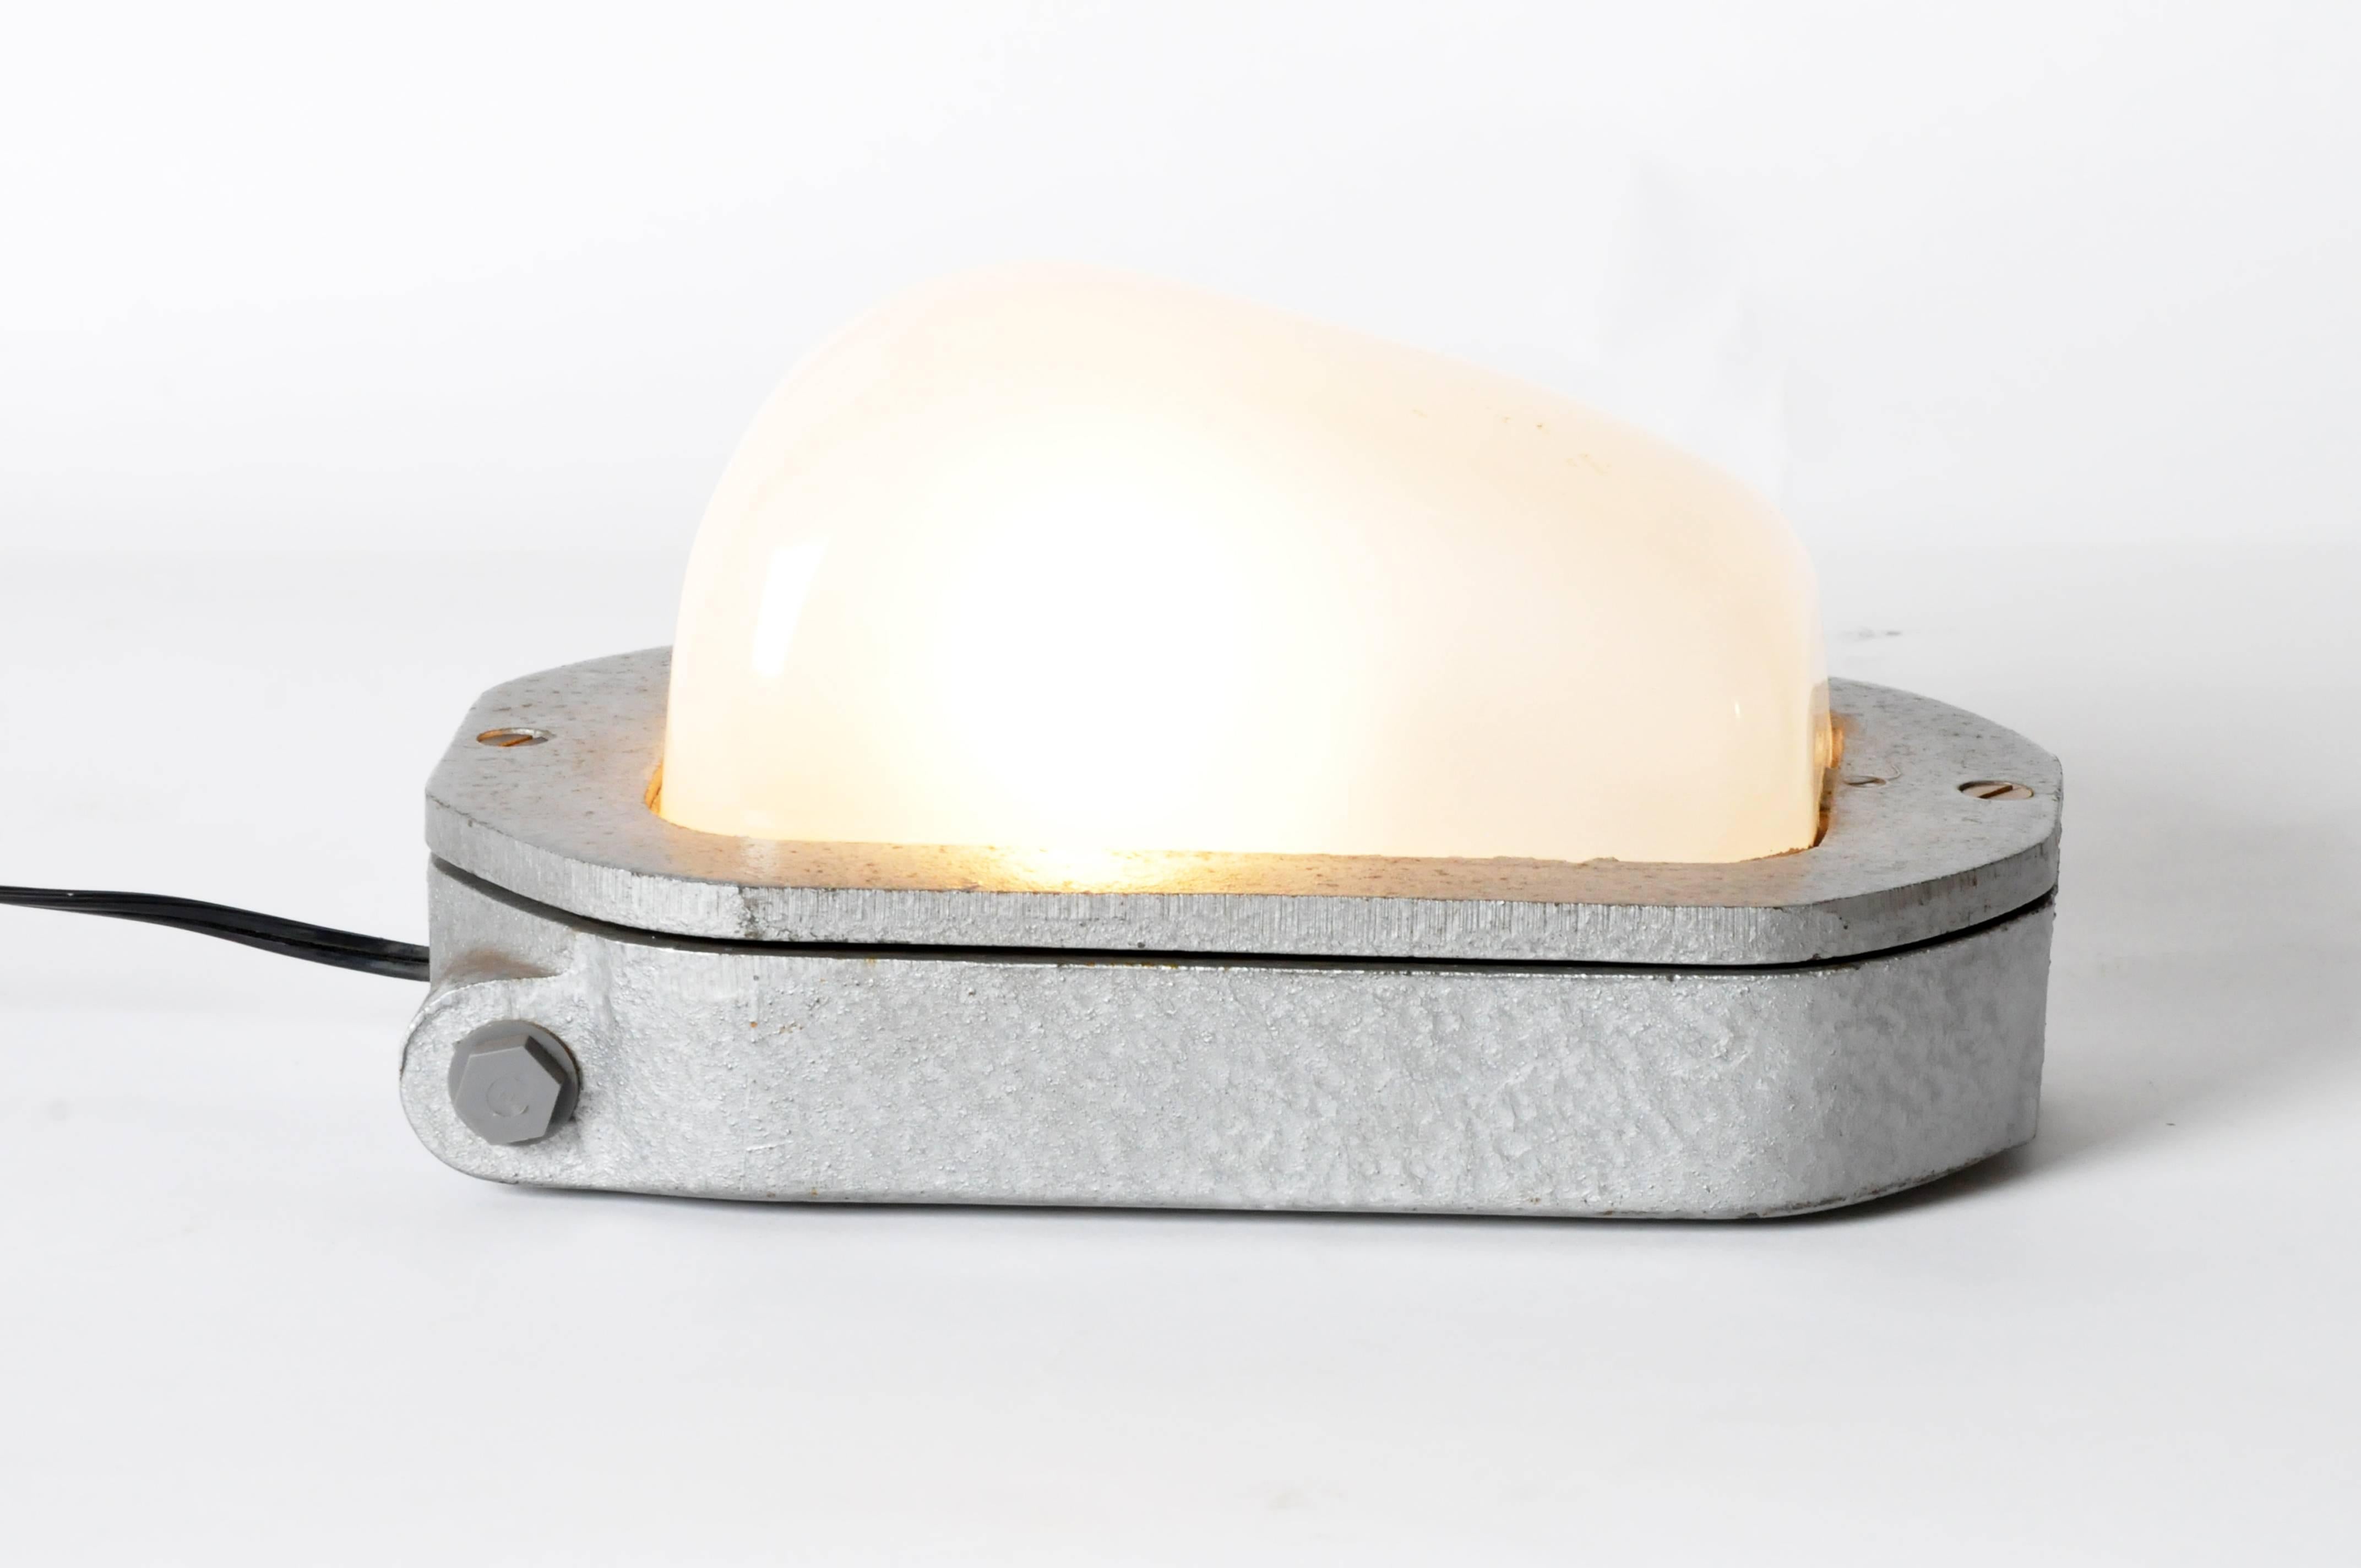 This fixture channels a nautical feel given its bulkhead lamp style. This light makes for an impressive sconce or tabletop lamp. The opaline-like glass dome is inset into the metal body, to which three felted feet have been added to protect the